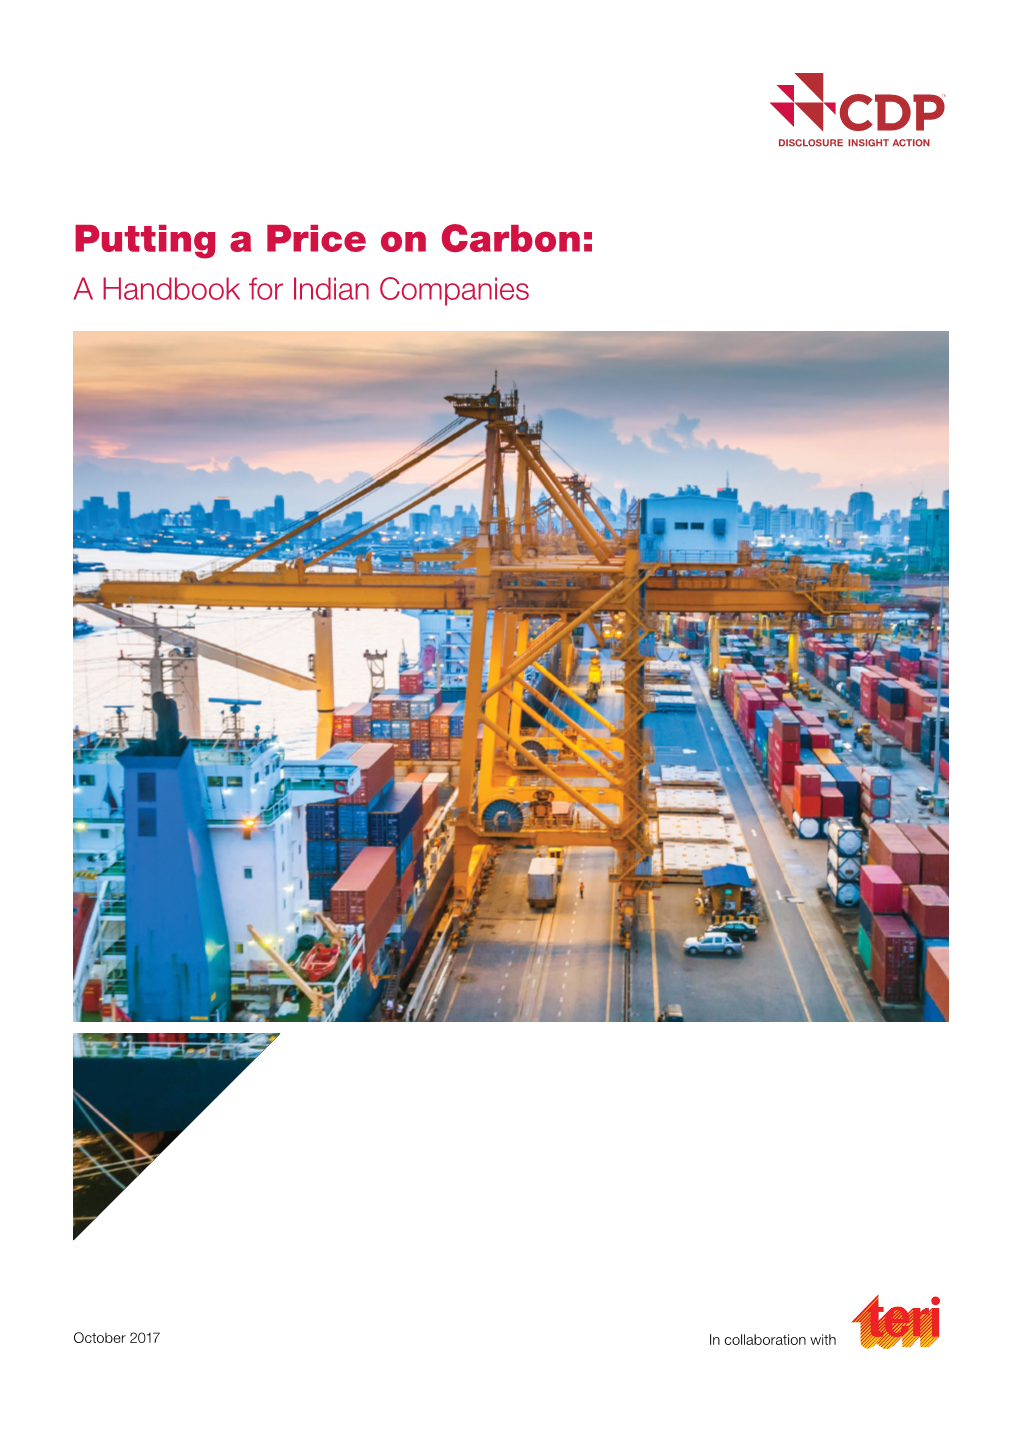 Putting a Price on Carbon: a Handbook for Indian Companies